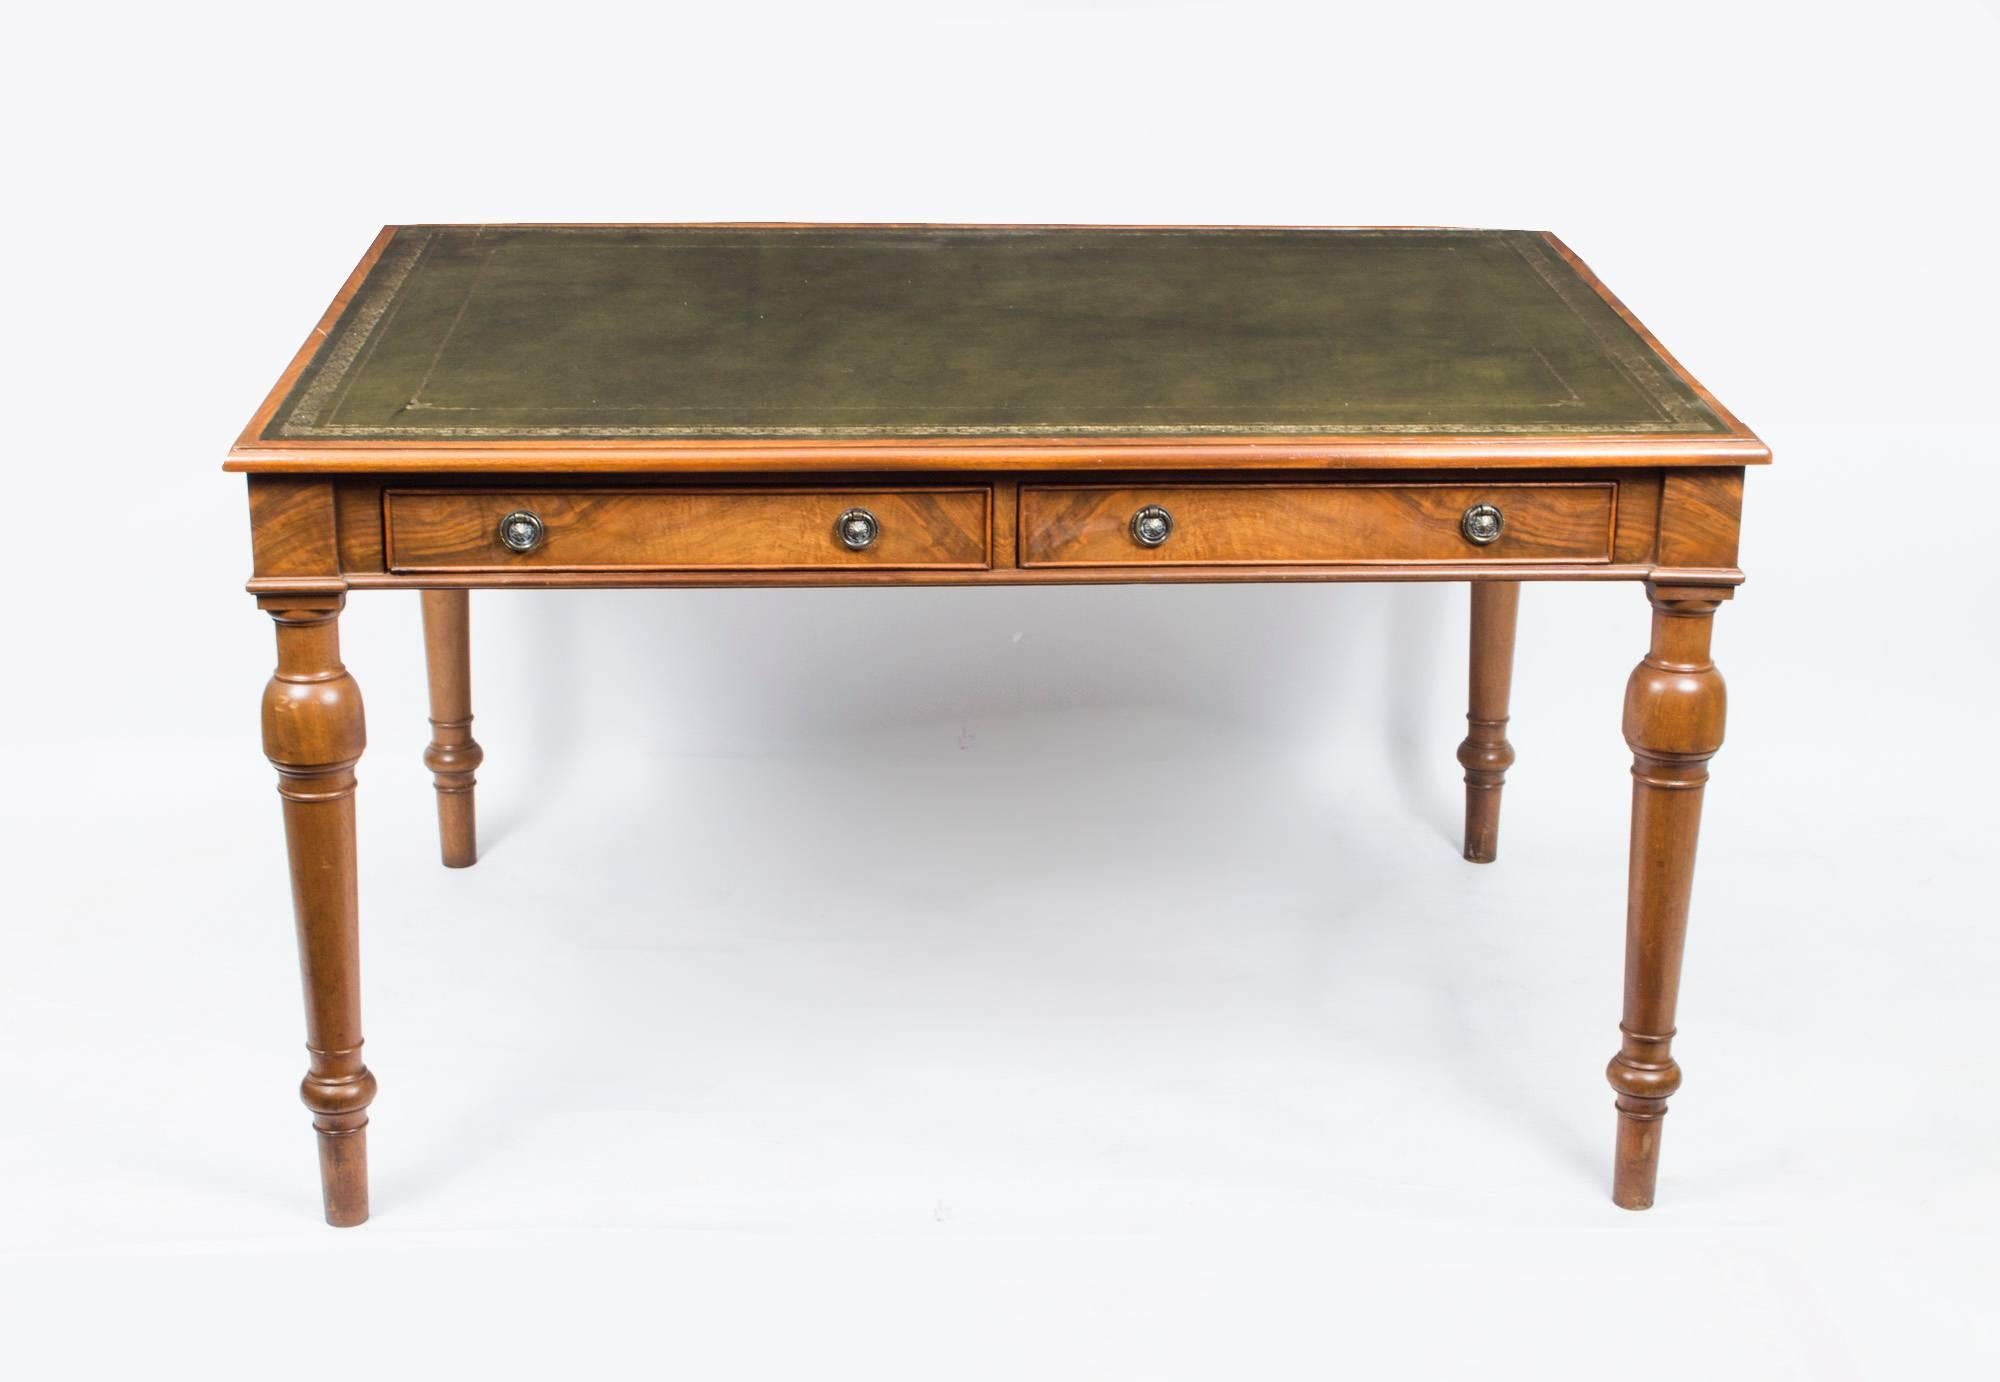 This is a lovely vintage English writing table, circa 1930 in date.

This desk has been crafted from beautiful burr walnut and features two spacious drawers and a gold-tooled faded green leather writing surface.

It is finished all round so it